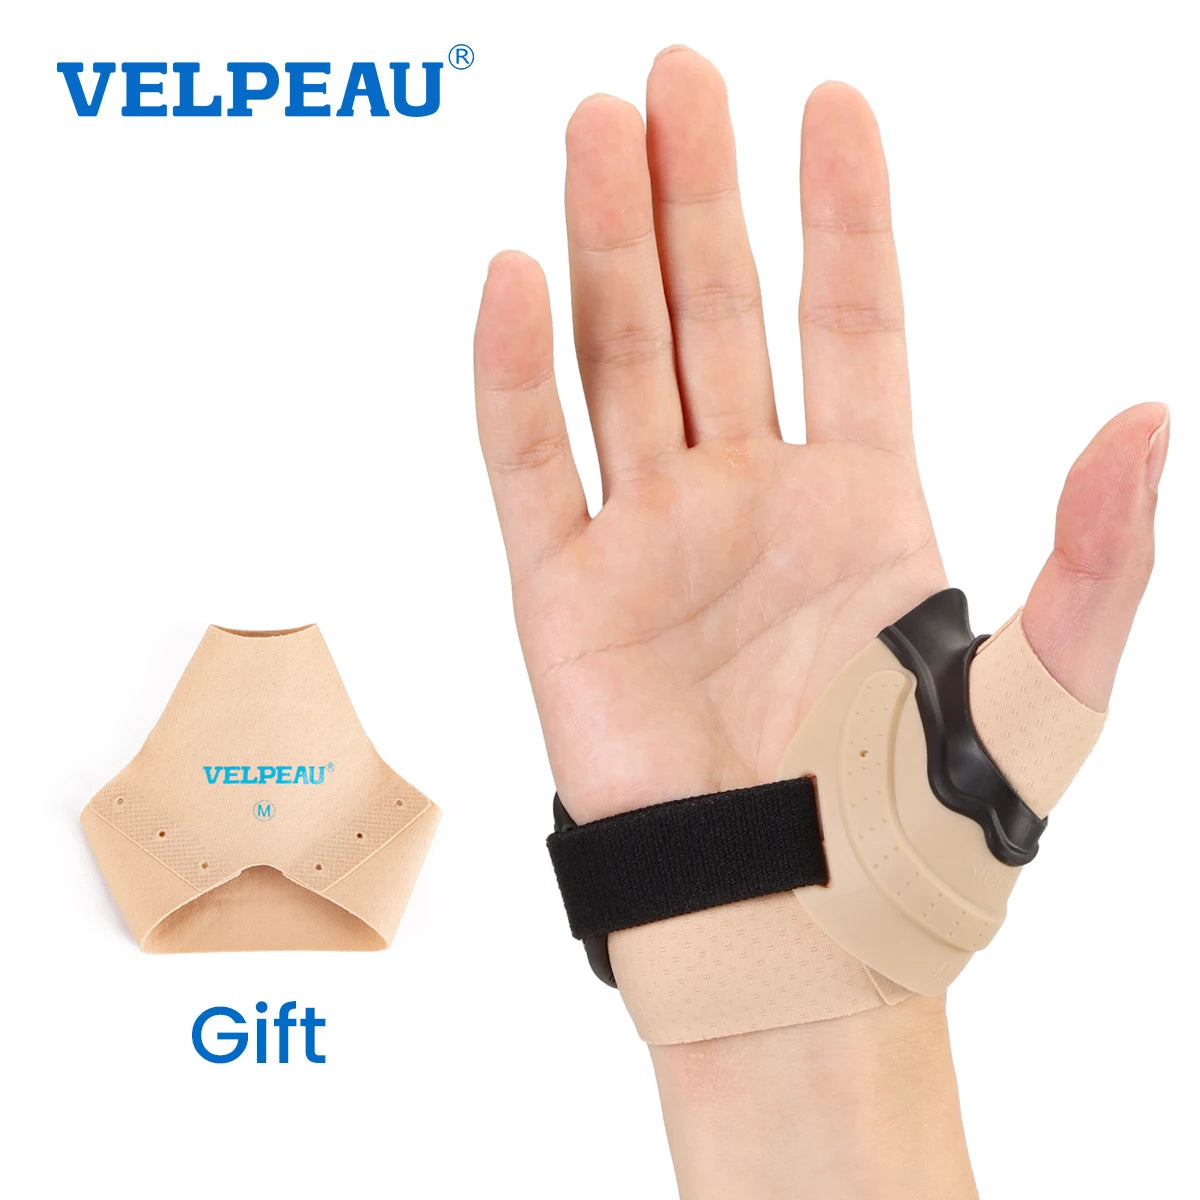 VELPEAU CMC Thumb Brace for Osteoarthritis and Arthritis Thumb Splint Support Anti Cracking And without Limiting Hand Function